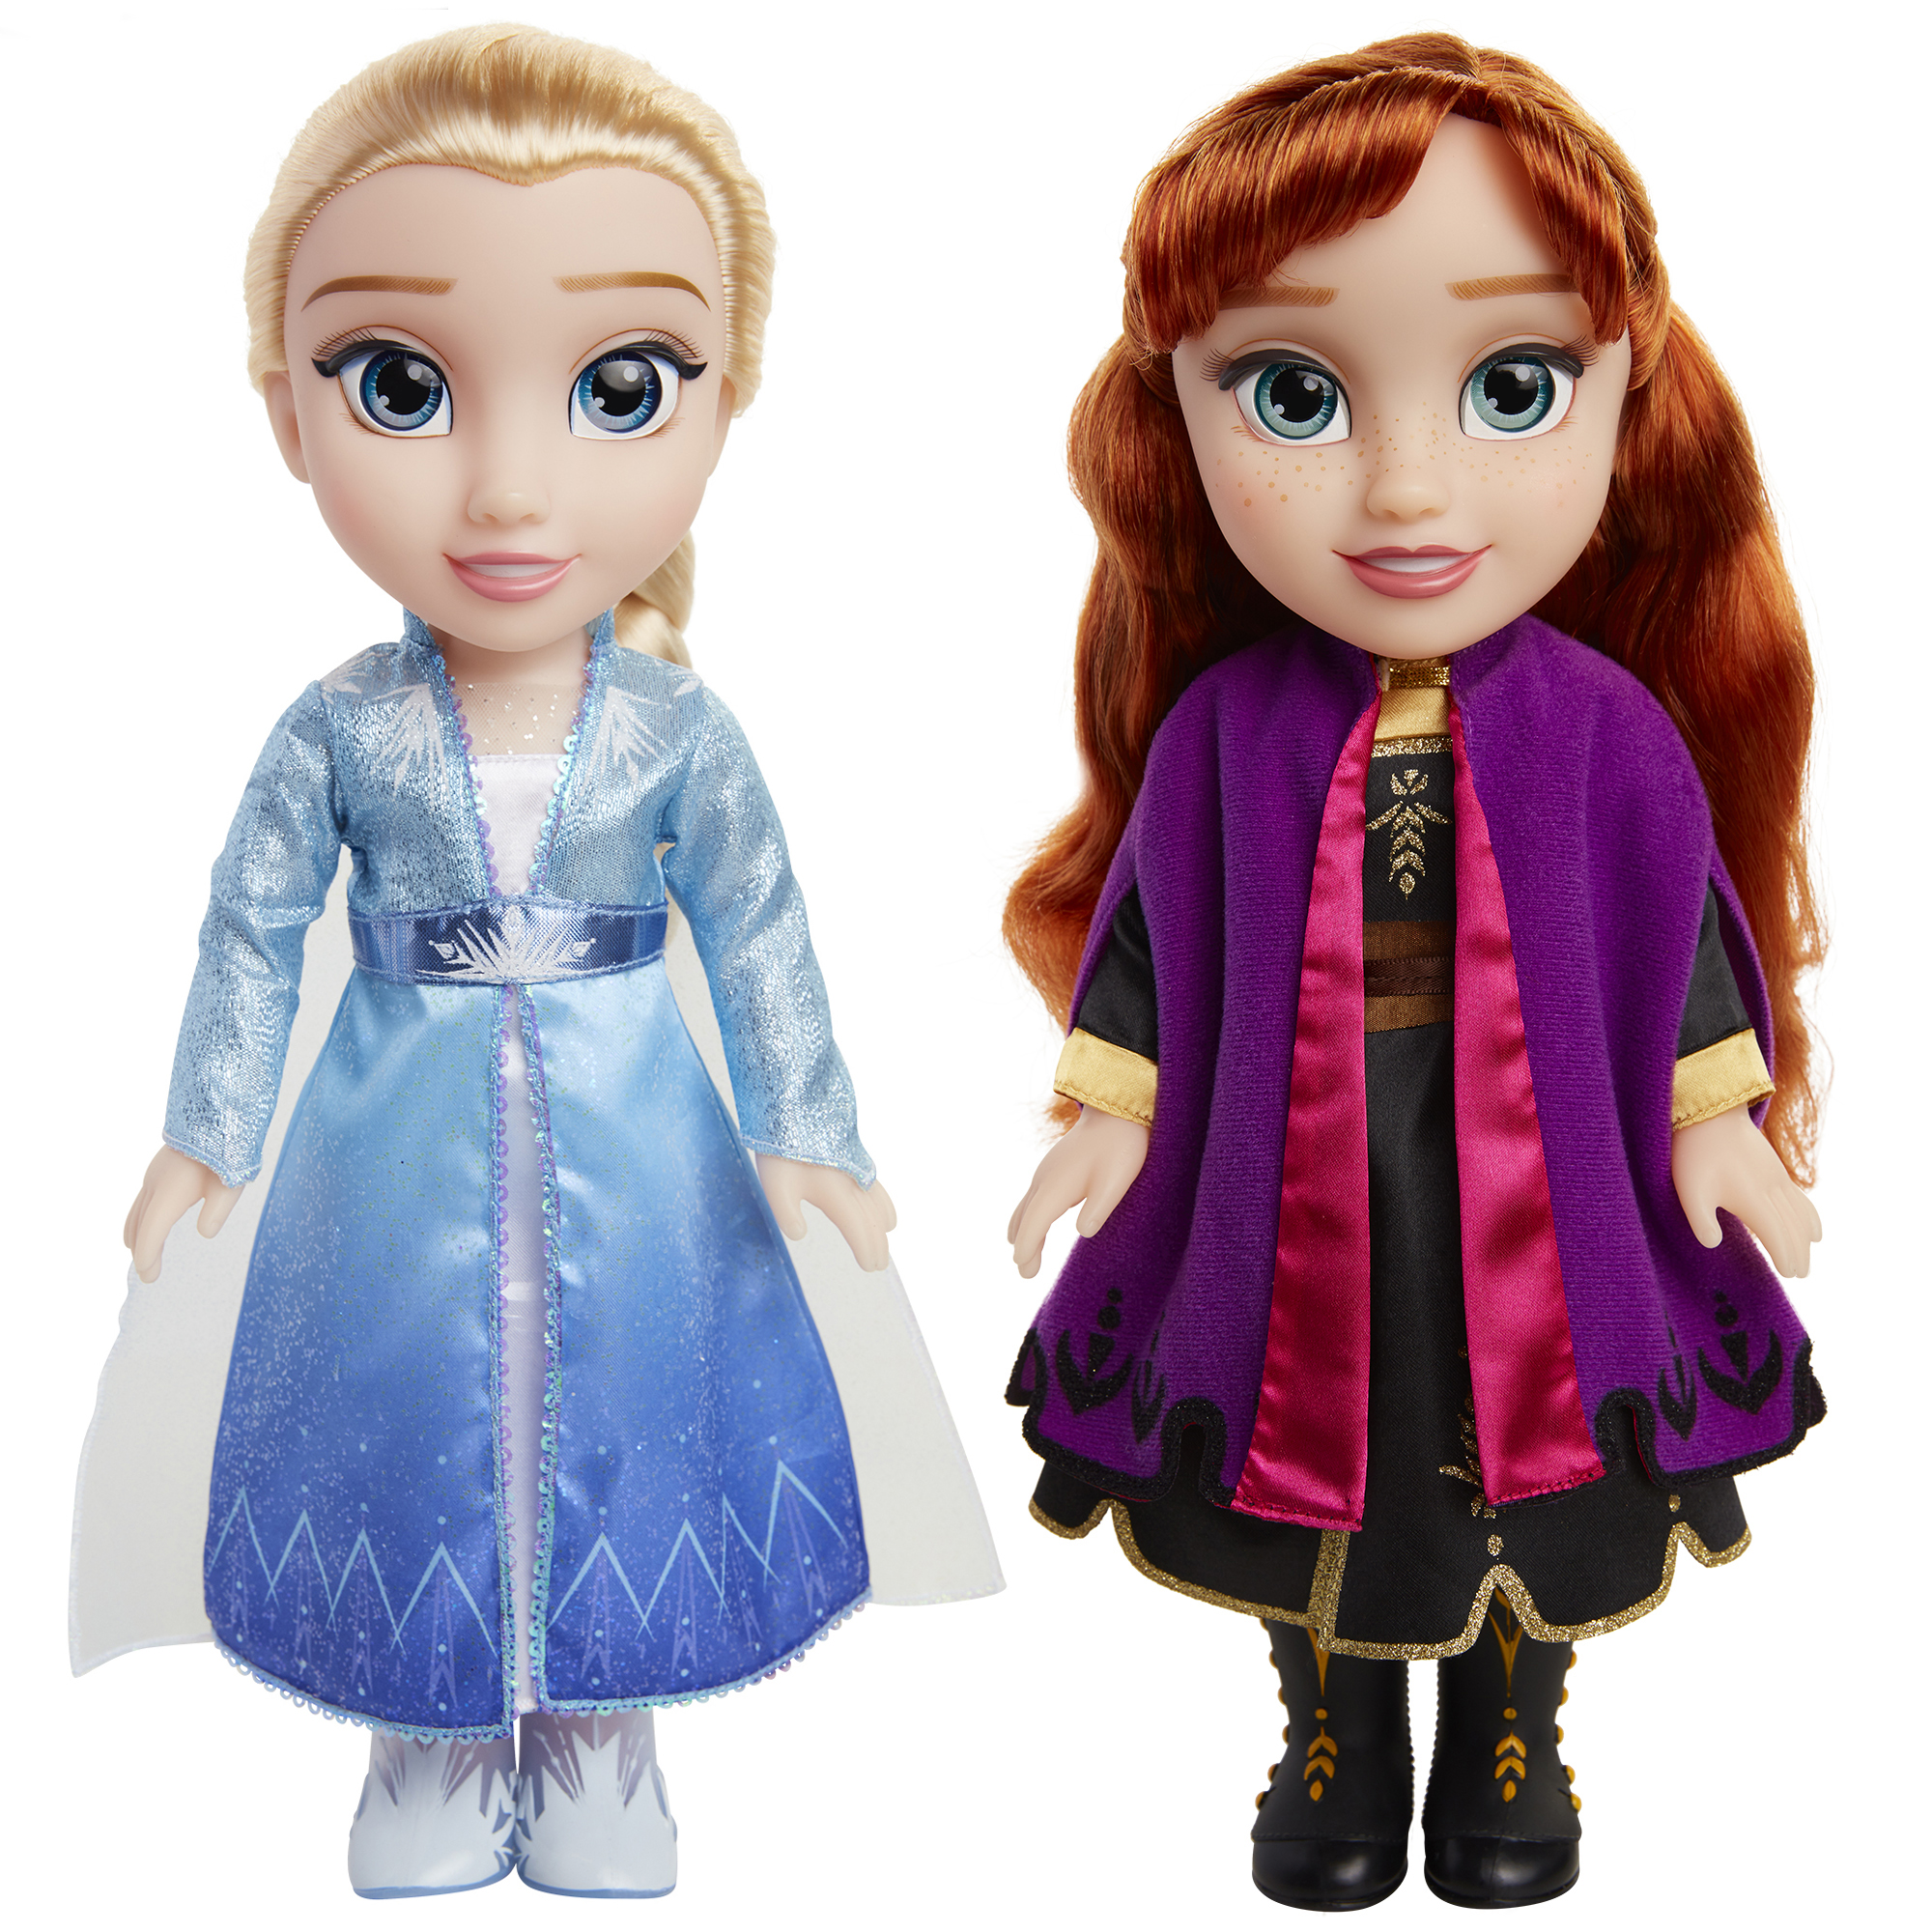 Disney Princess Anna and Elsa 14 Inch Singing Sisters Feature Fashion Doll 2 Pack - image 1 of 12